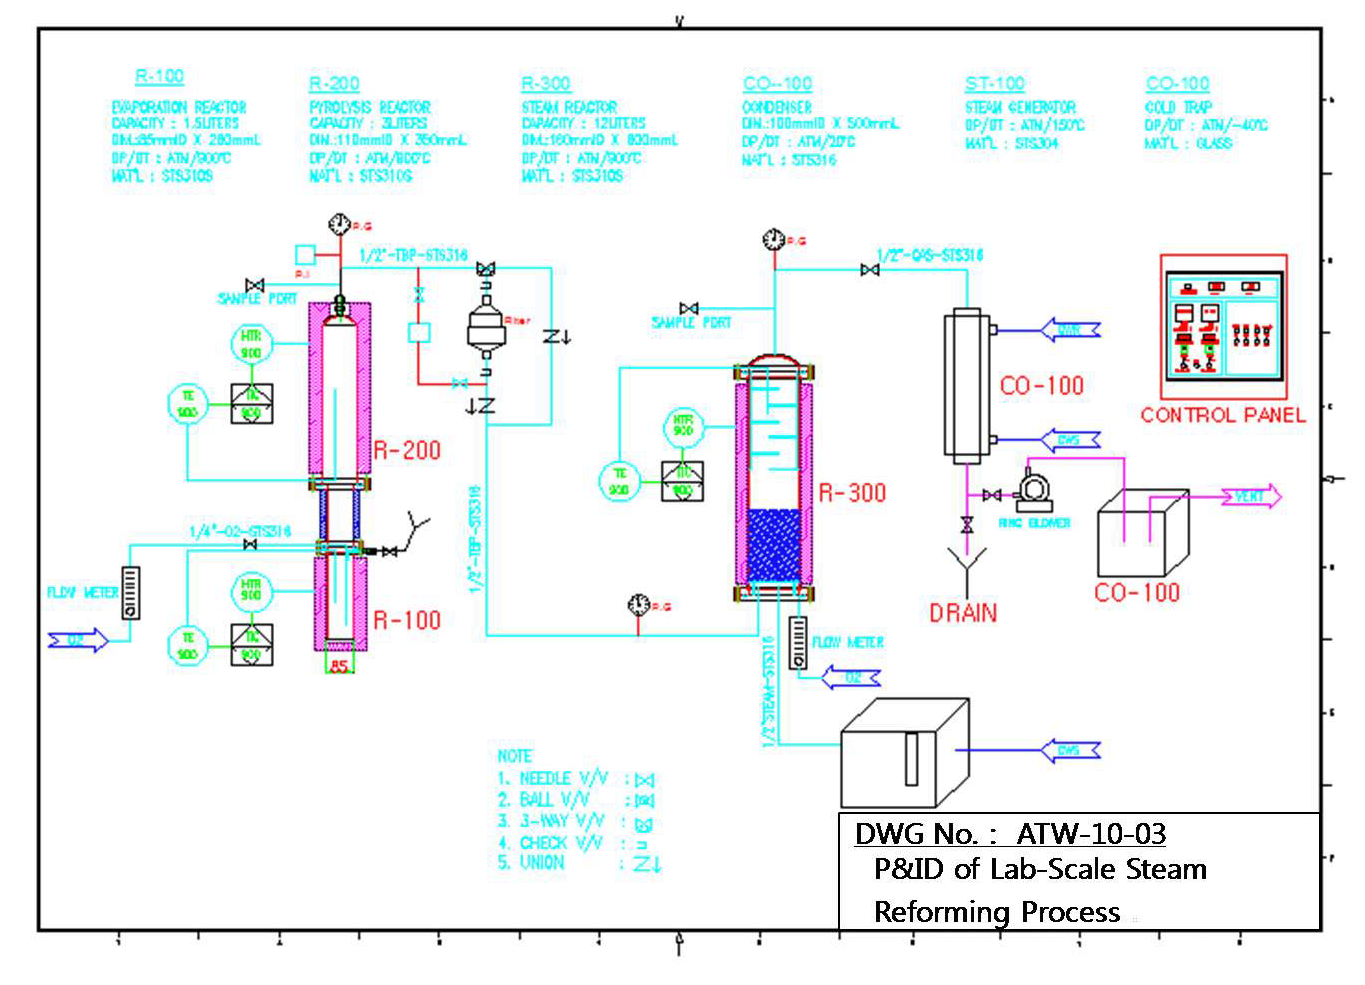 Fig. 3.3.41. A schematic diagram of lab-scale (0.2 kg-TBP/h) steam reforming process for the treatment of alpha-bearing mixed waste